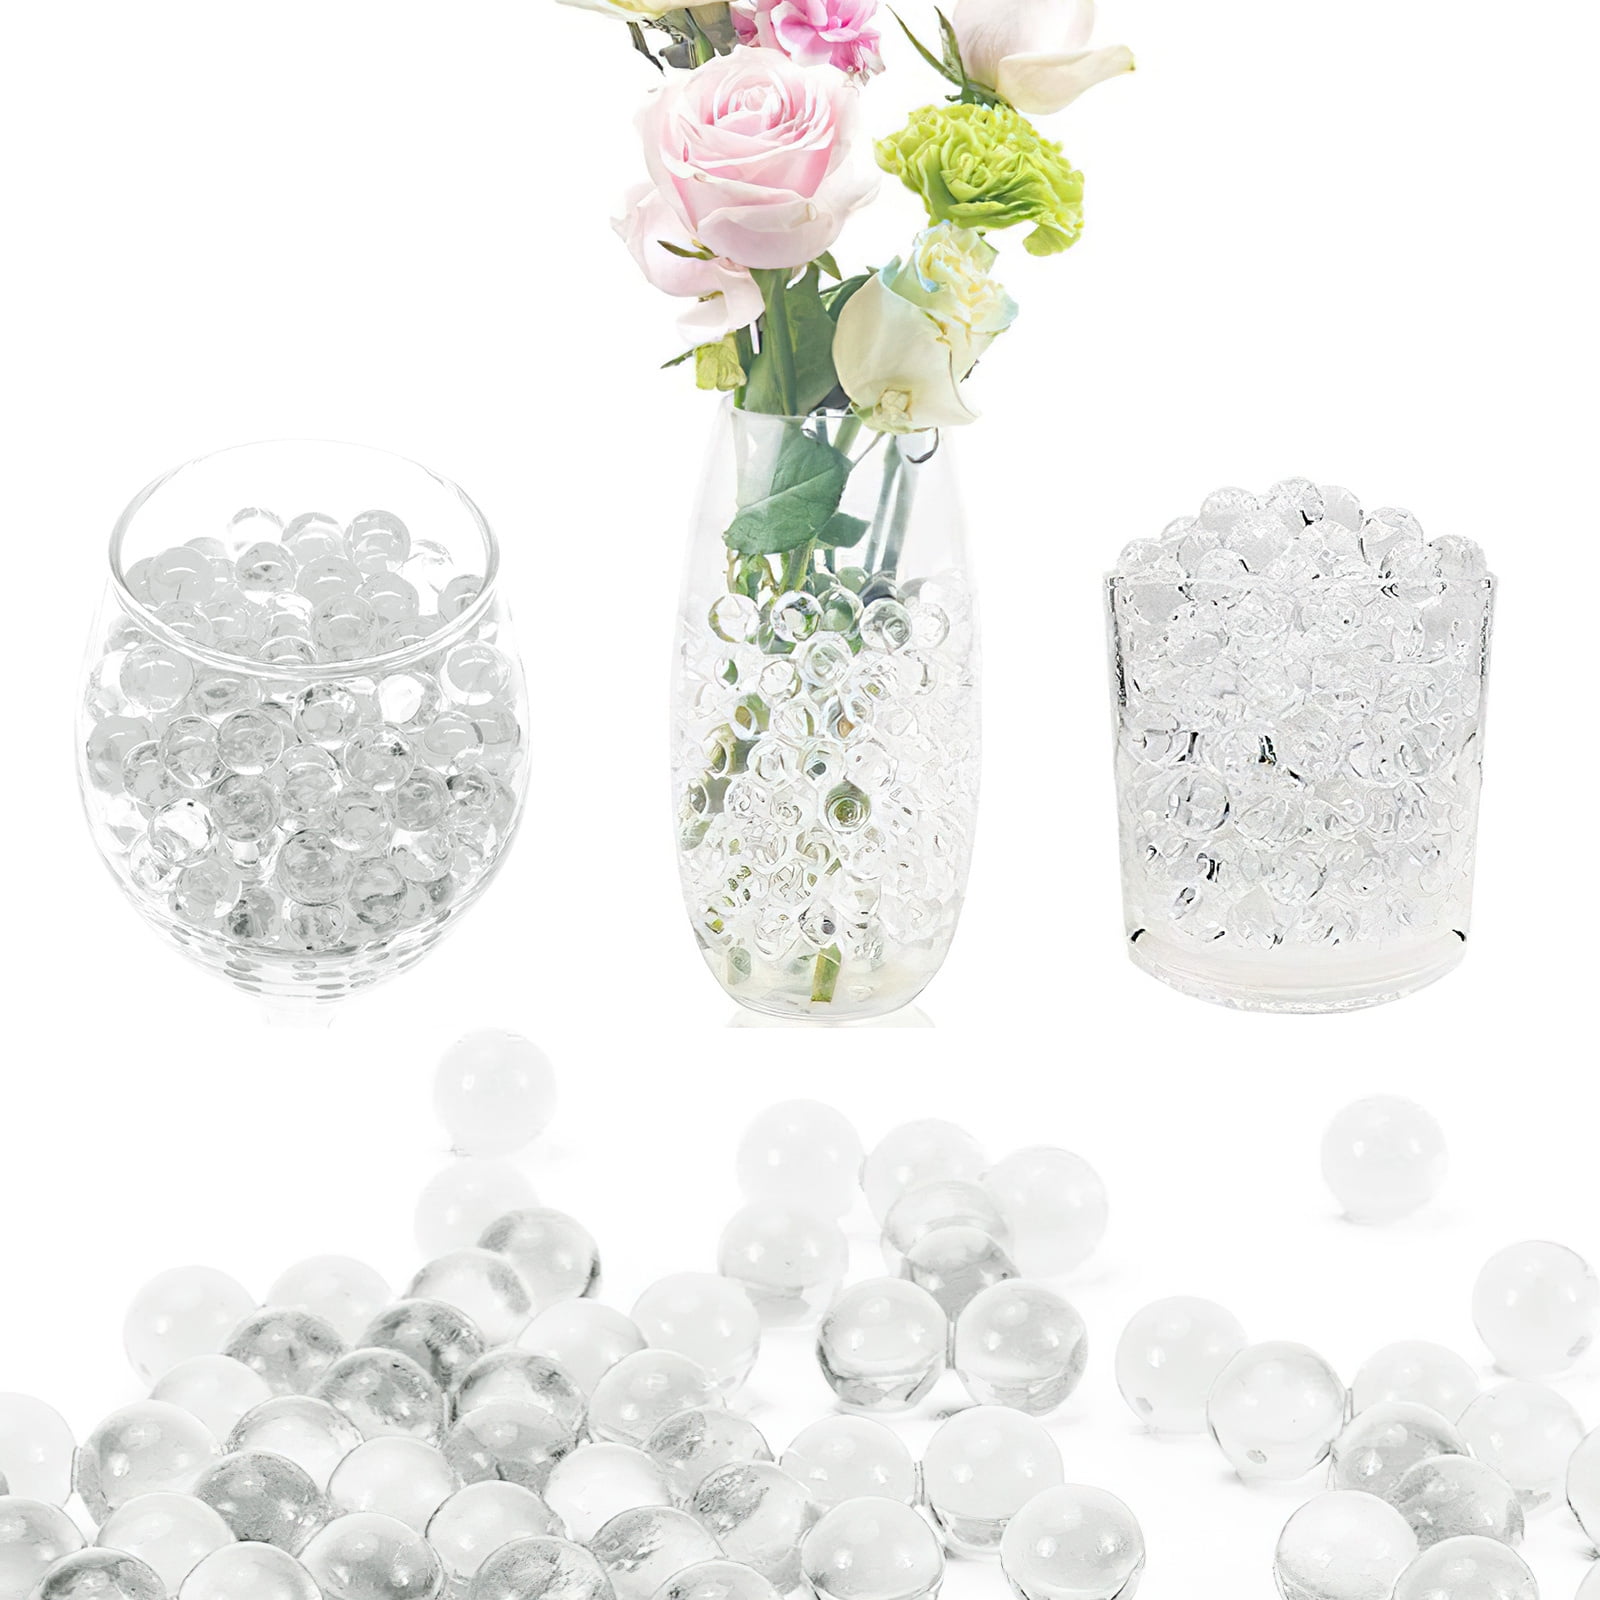 50,000 Pcs Water Gel Beads Clear Vase Filler Beads Water Growing Balls  Vases Crystal Jelly Balls for Floating Floral Candle Pearls Wedding  Centerpiece